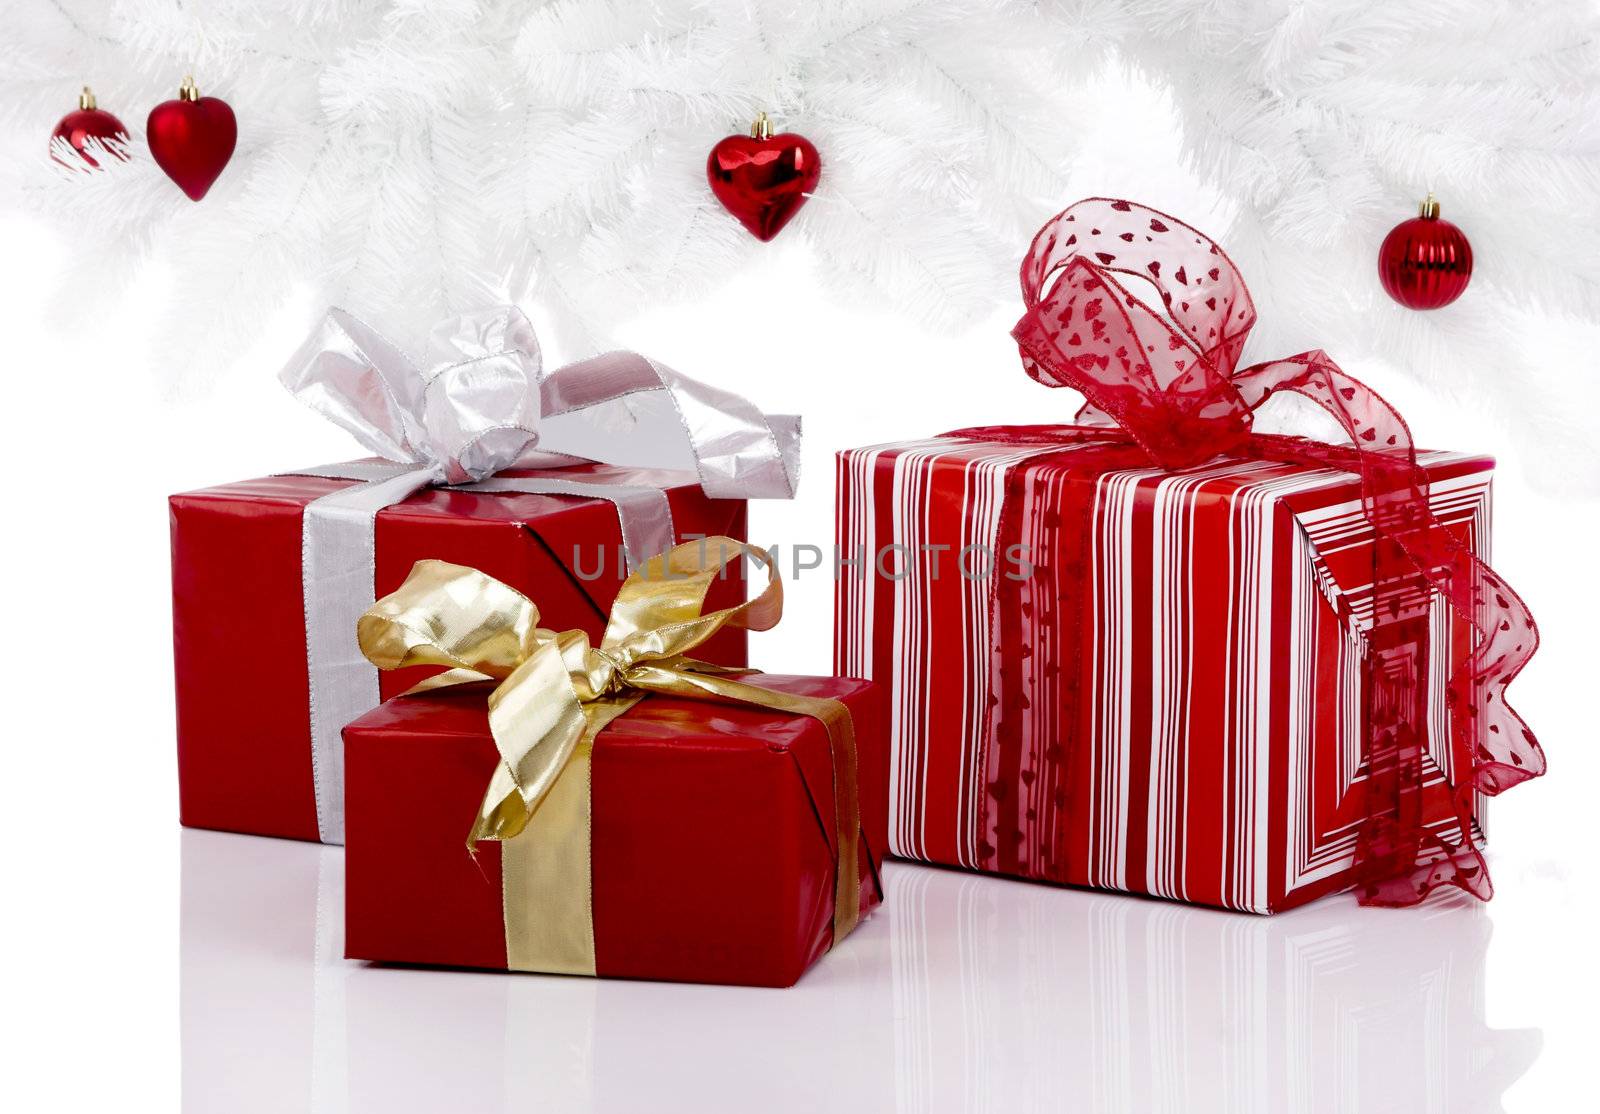 Christmas gifts by Iko